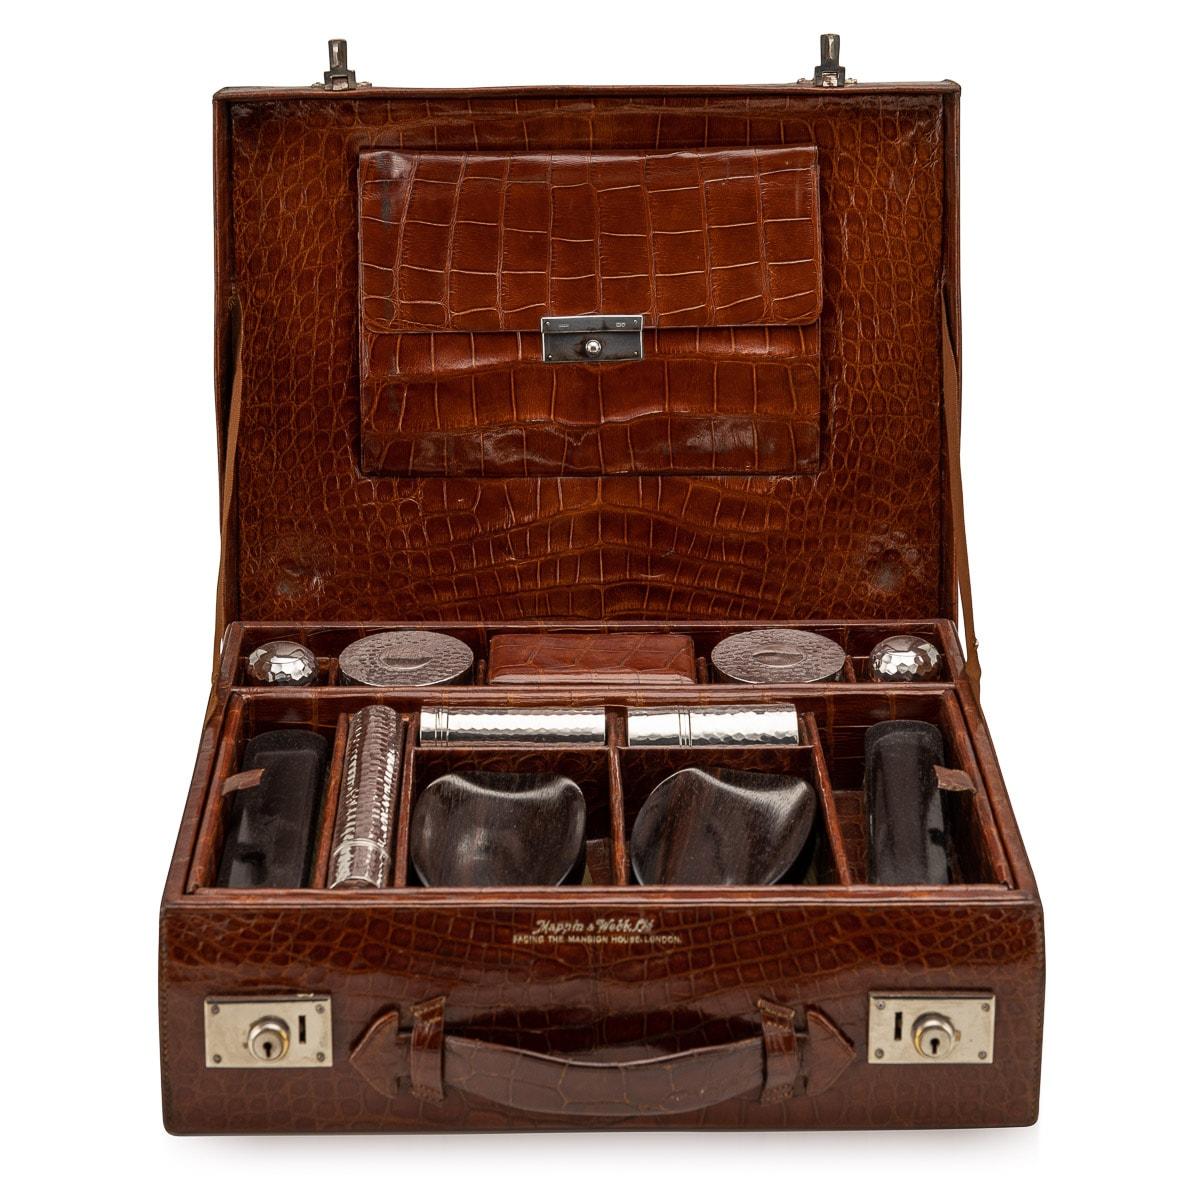 Antique early-20th Century British made crocodile overnight travel vanity case, with original cotton lining and small document holder on the inside. This tan crocodile vanity case has original bottles and jars in cut glass with silver tops, wooden